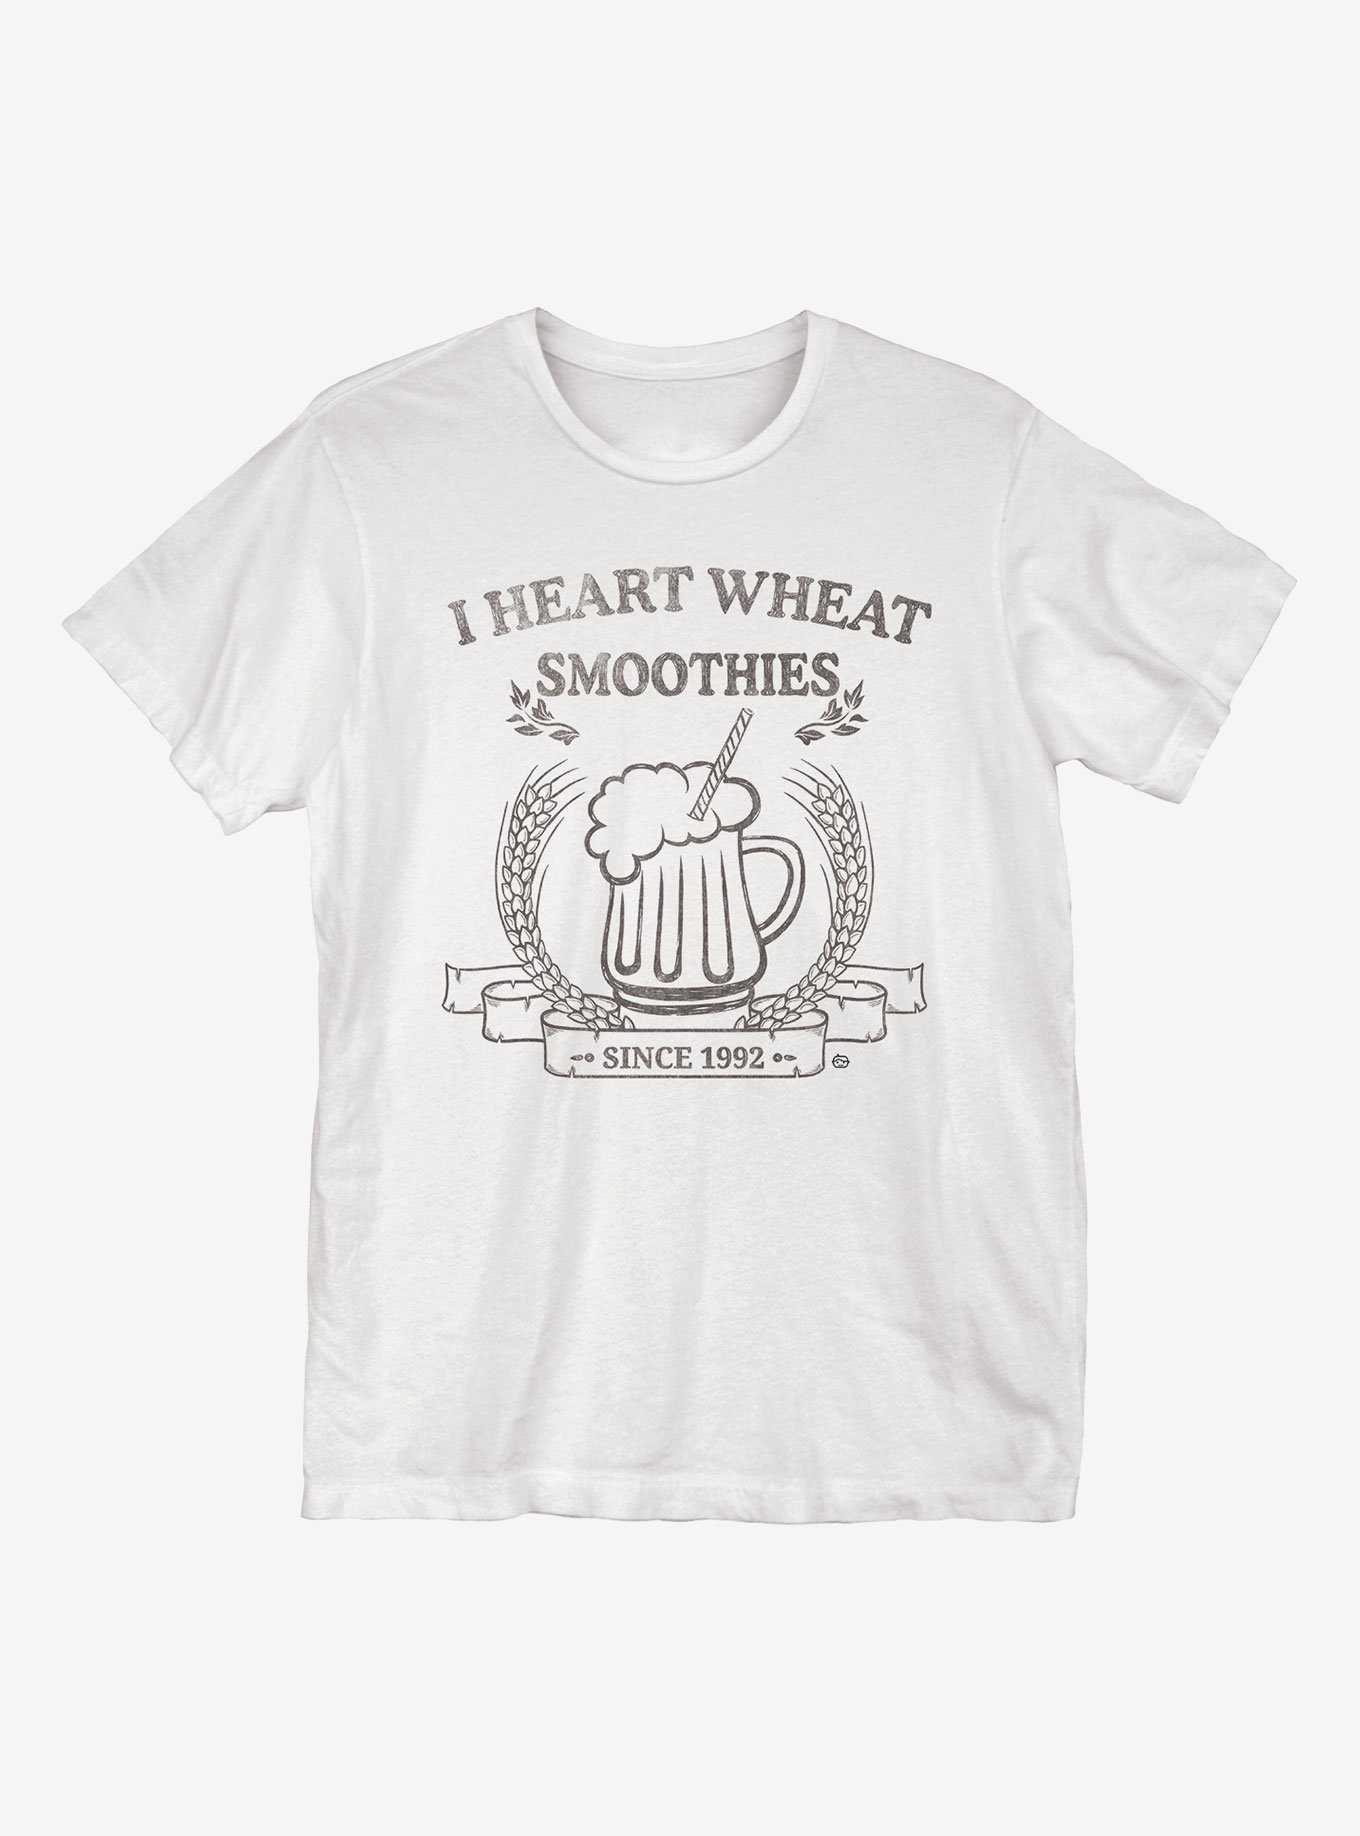 Wheat Smoothies T-Shirt, , hi-res